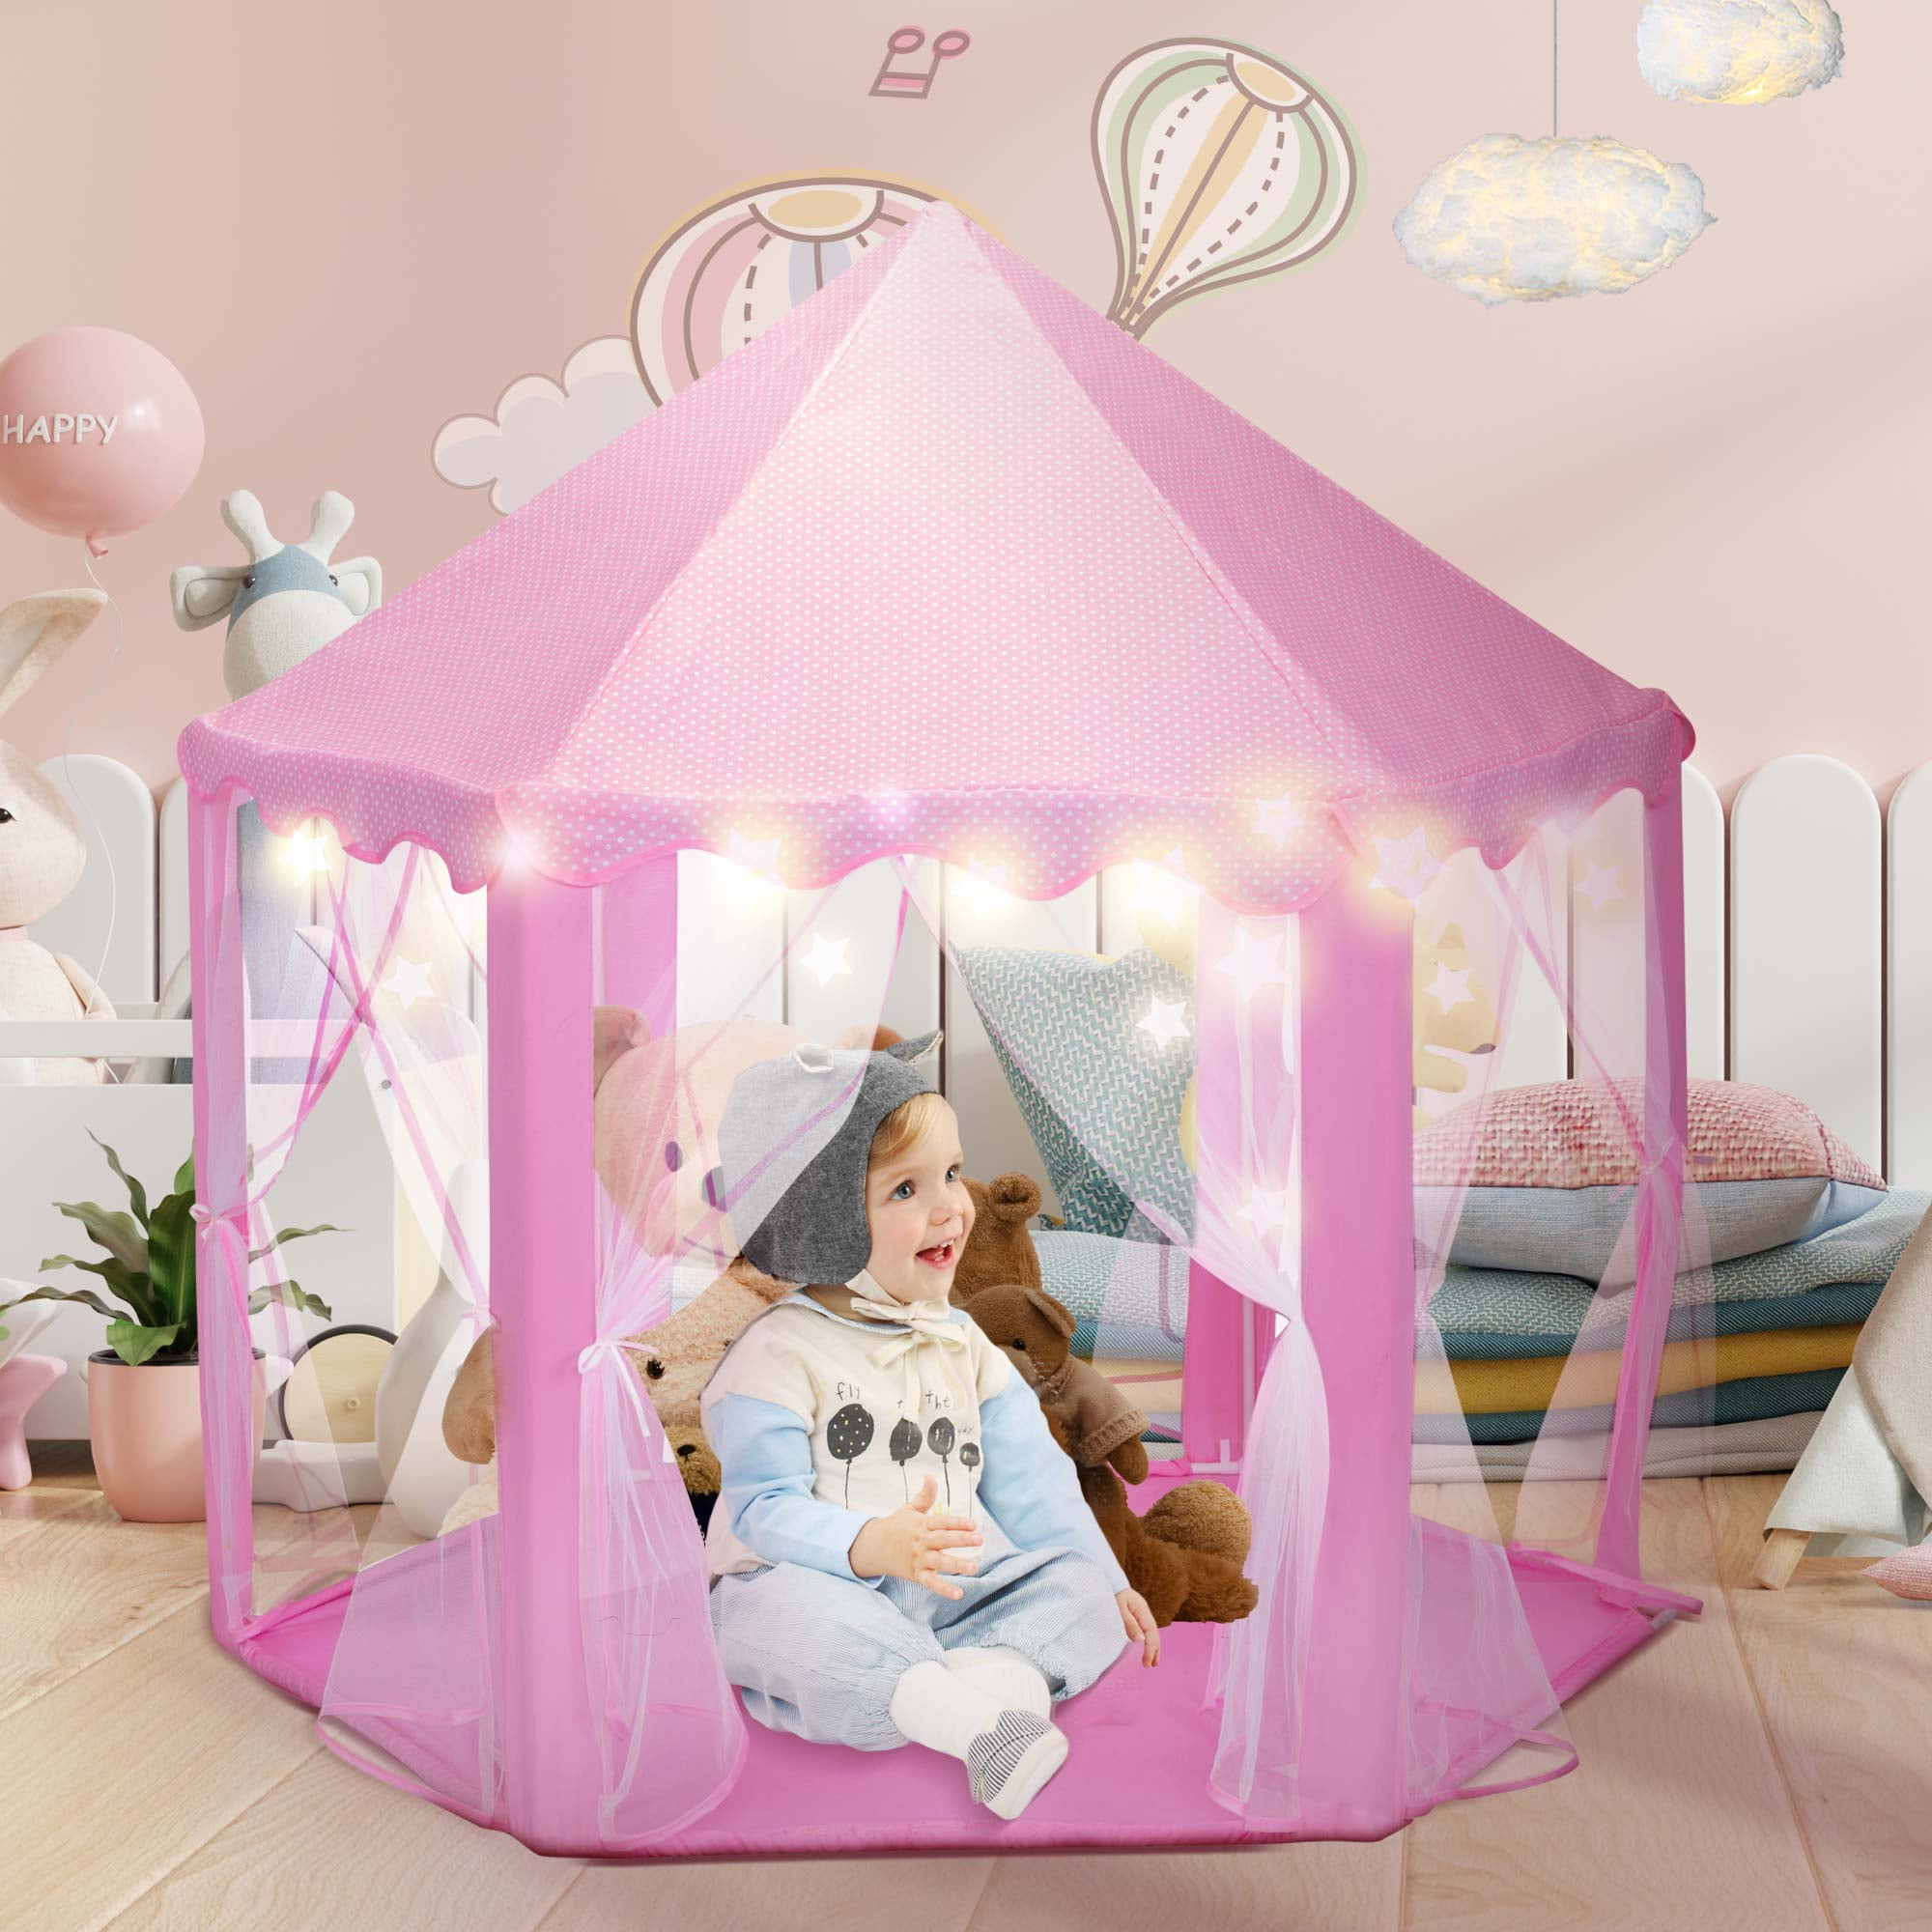 EJOY e-Joy Kids Indoor/Outdoor Play Fairy Princess Castle Tent X-Large Pink Portable Fun Perfect Hexagon Large Playhouse Toys for Girls/Children/Toddlers Gift Room 